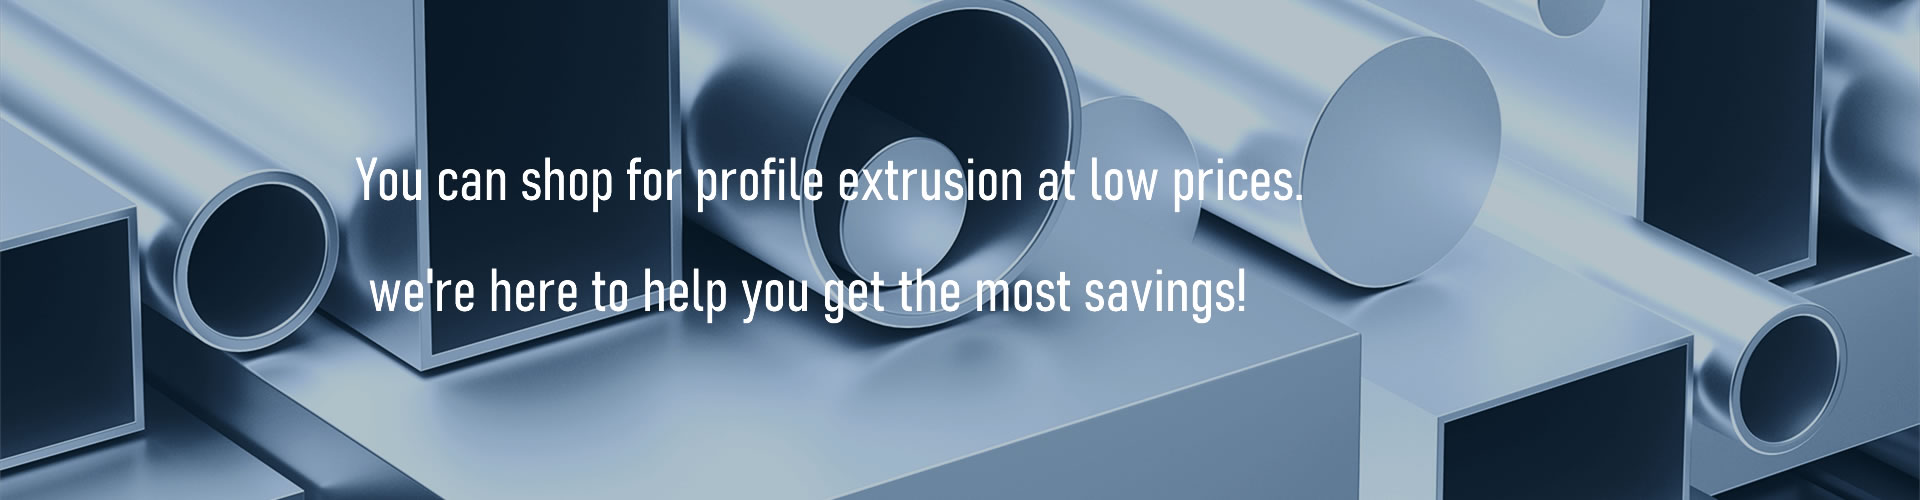 You can shop for profile extrusion at low prices.